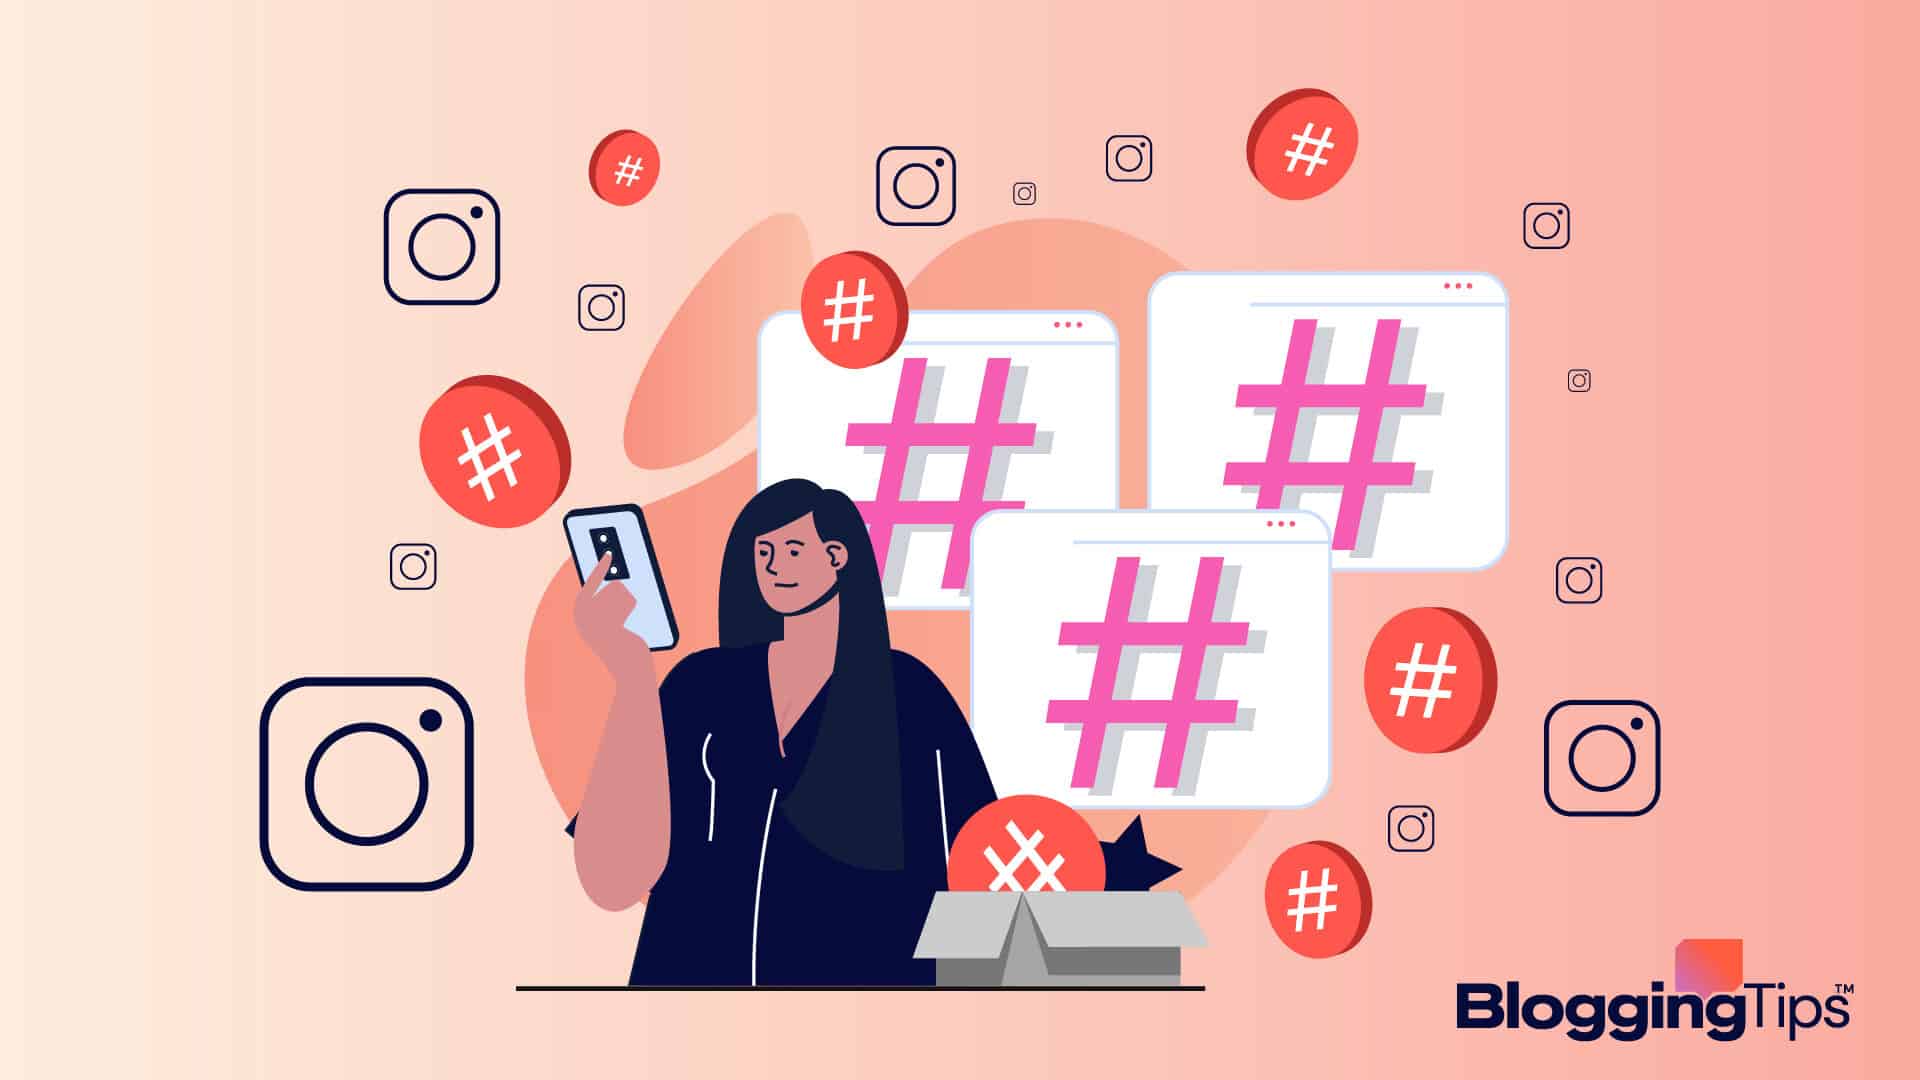 vector graphic showing an illustration of signs of hashtags used on instagram